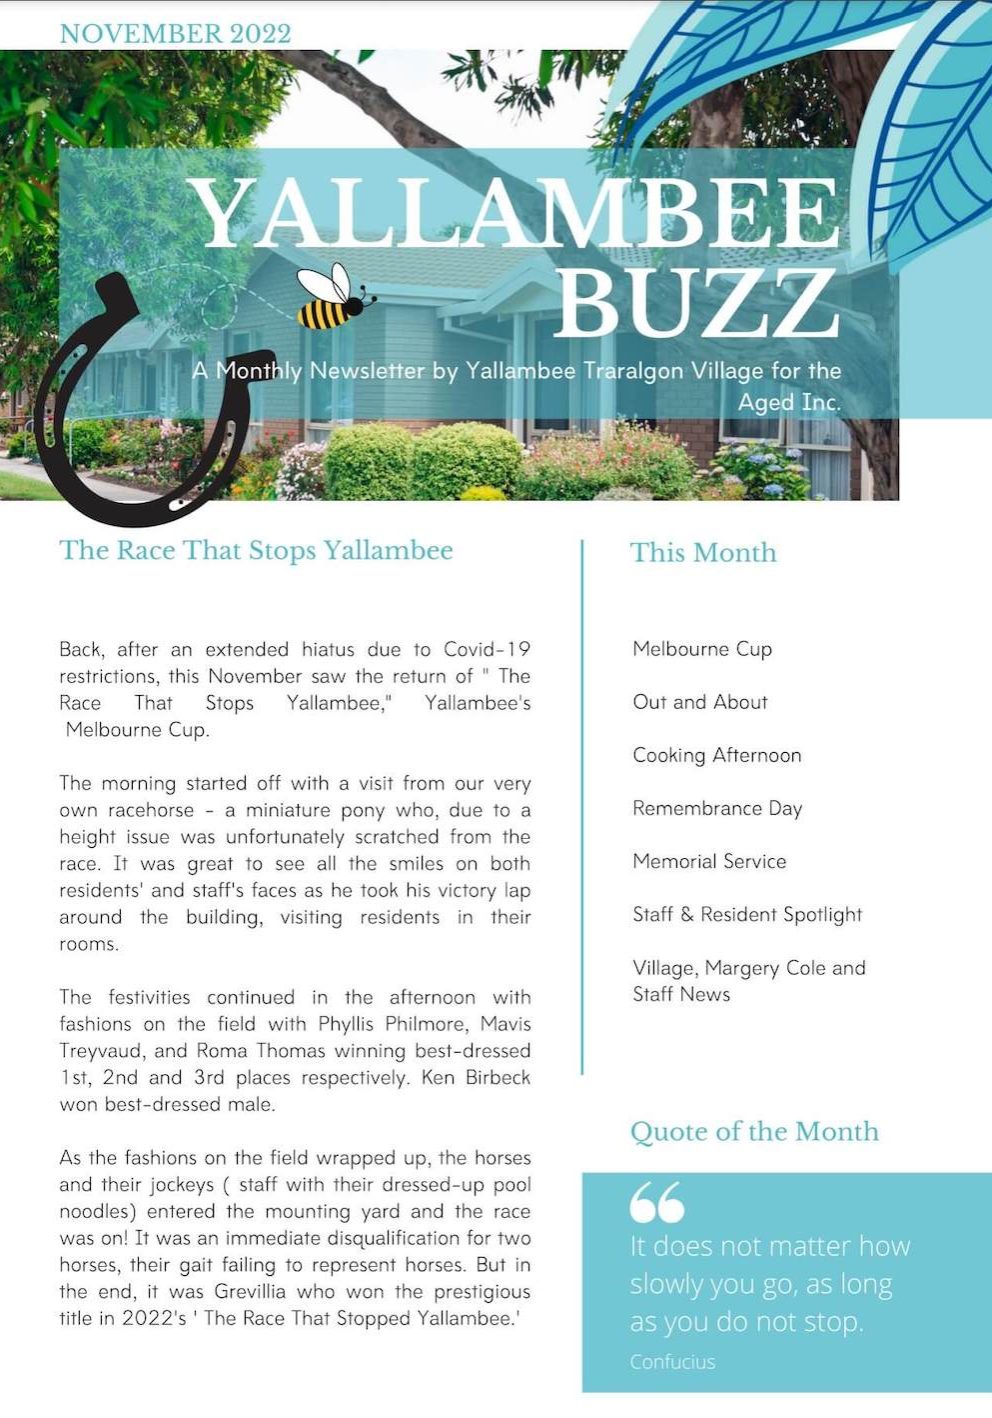 Screenshot of the cover of the November 2022 Yallambee Buzz newsletter.